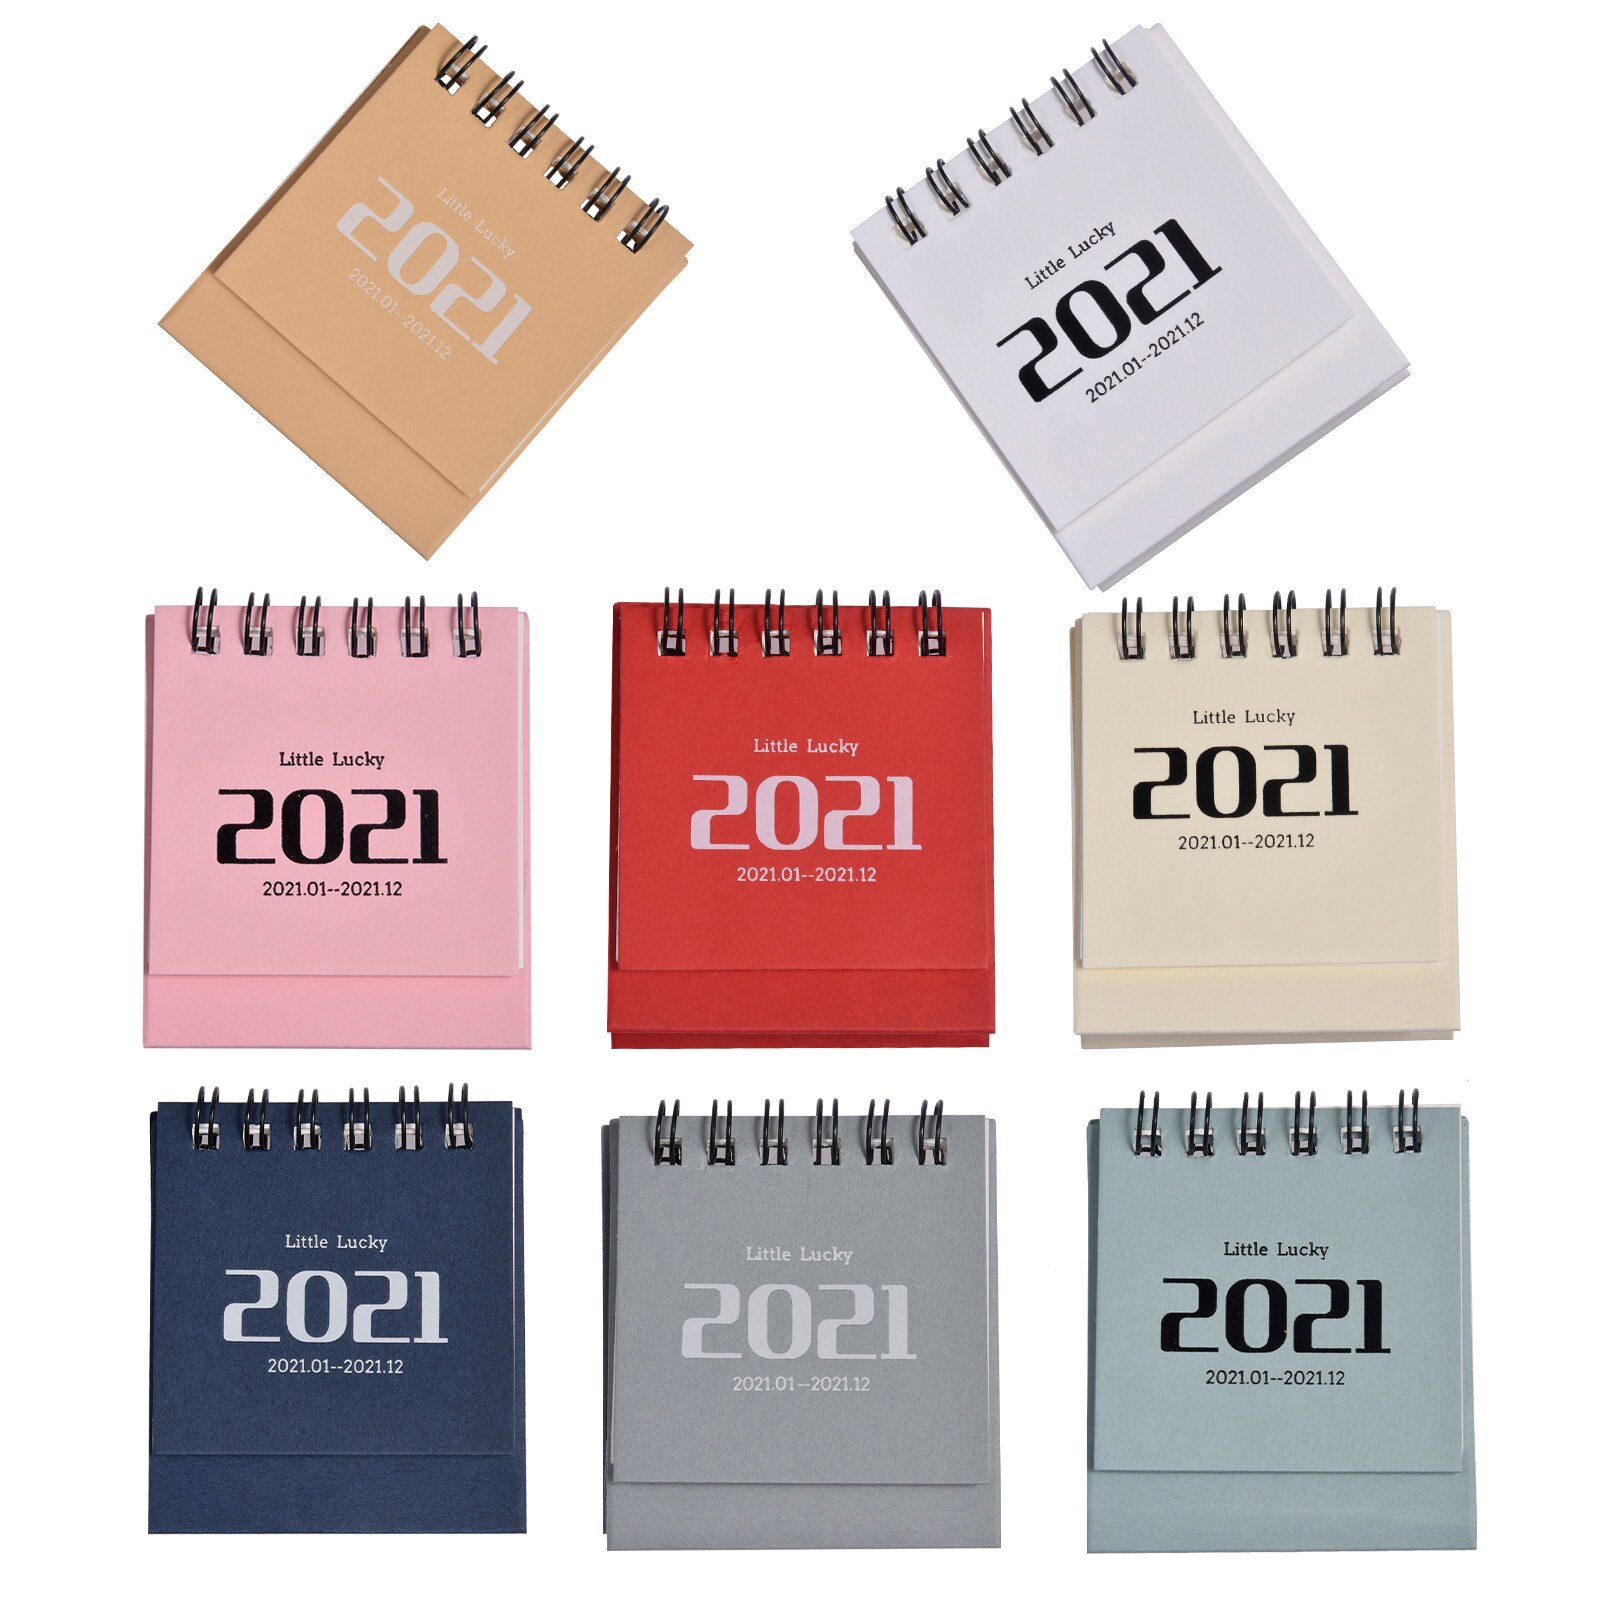 Mini Calendars Small Desk Calendar Convenient Daily Schedule Table Planner Yearly Organizer Office School Supplies